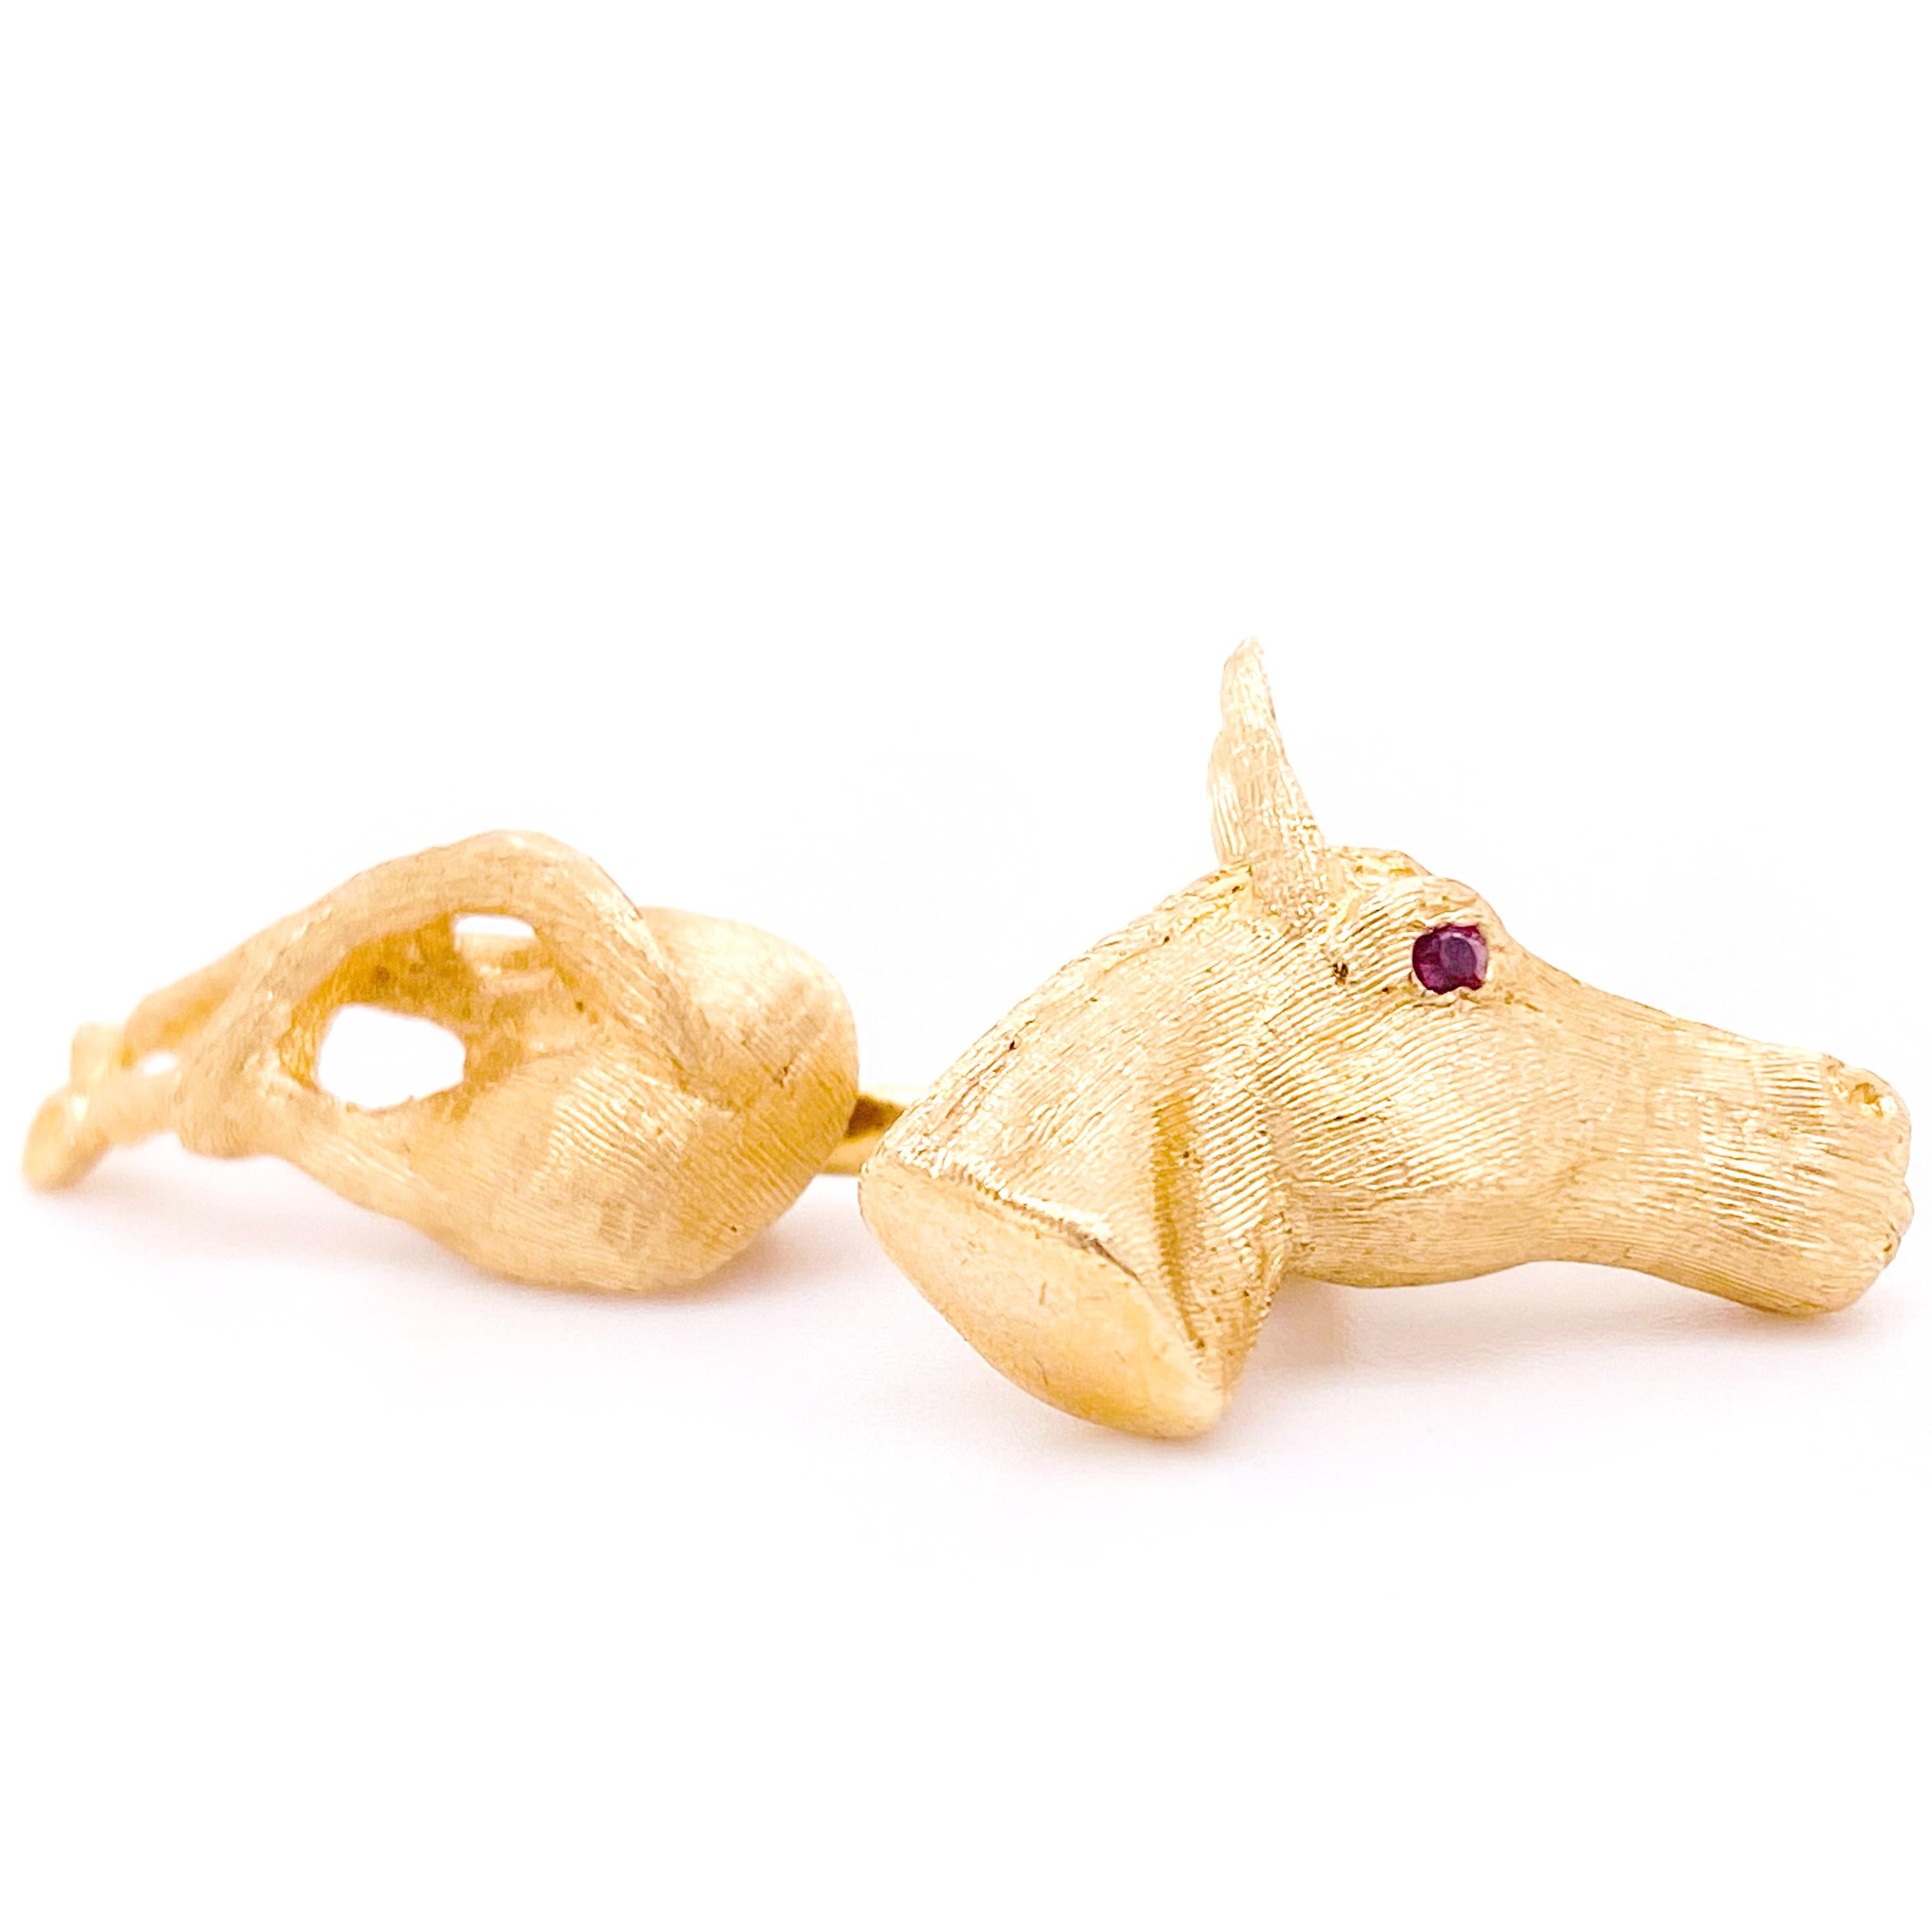 The lovely equestrian cufflinks  are solid 14 karat gold with gorgeous, bright red rubies in the eyes. These rich, 14 karat yellow gold, beautiful buttery color cufflinks are the perfect gift for your friend or family member that loves horses or can